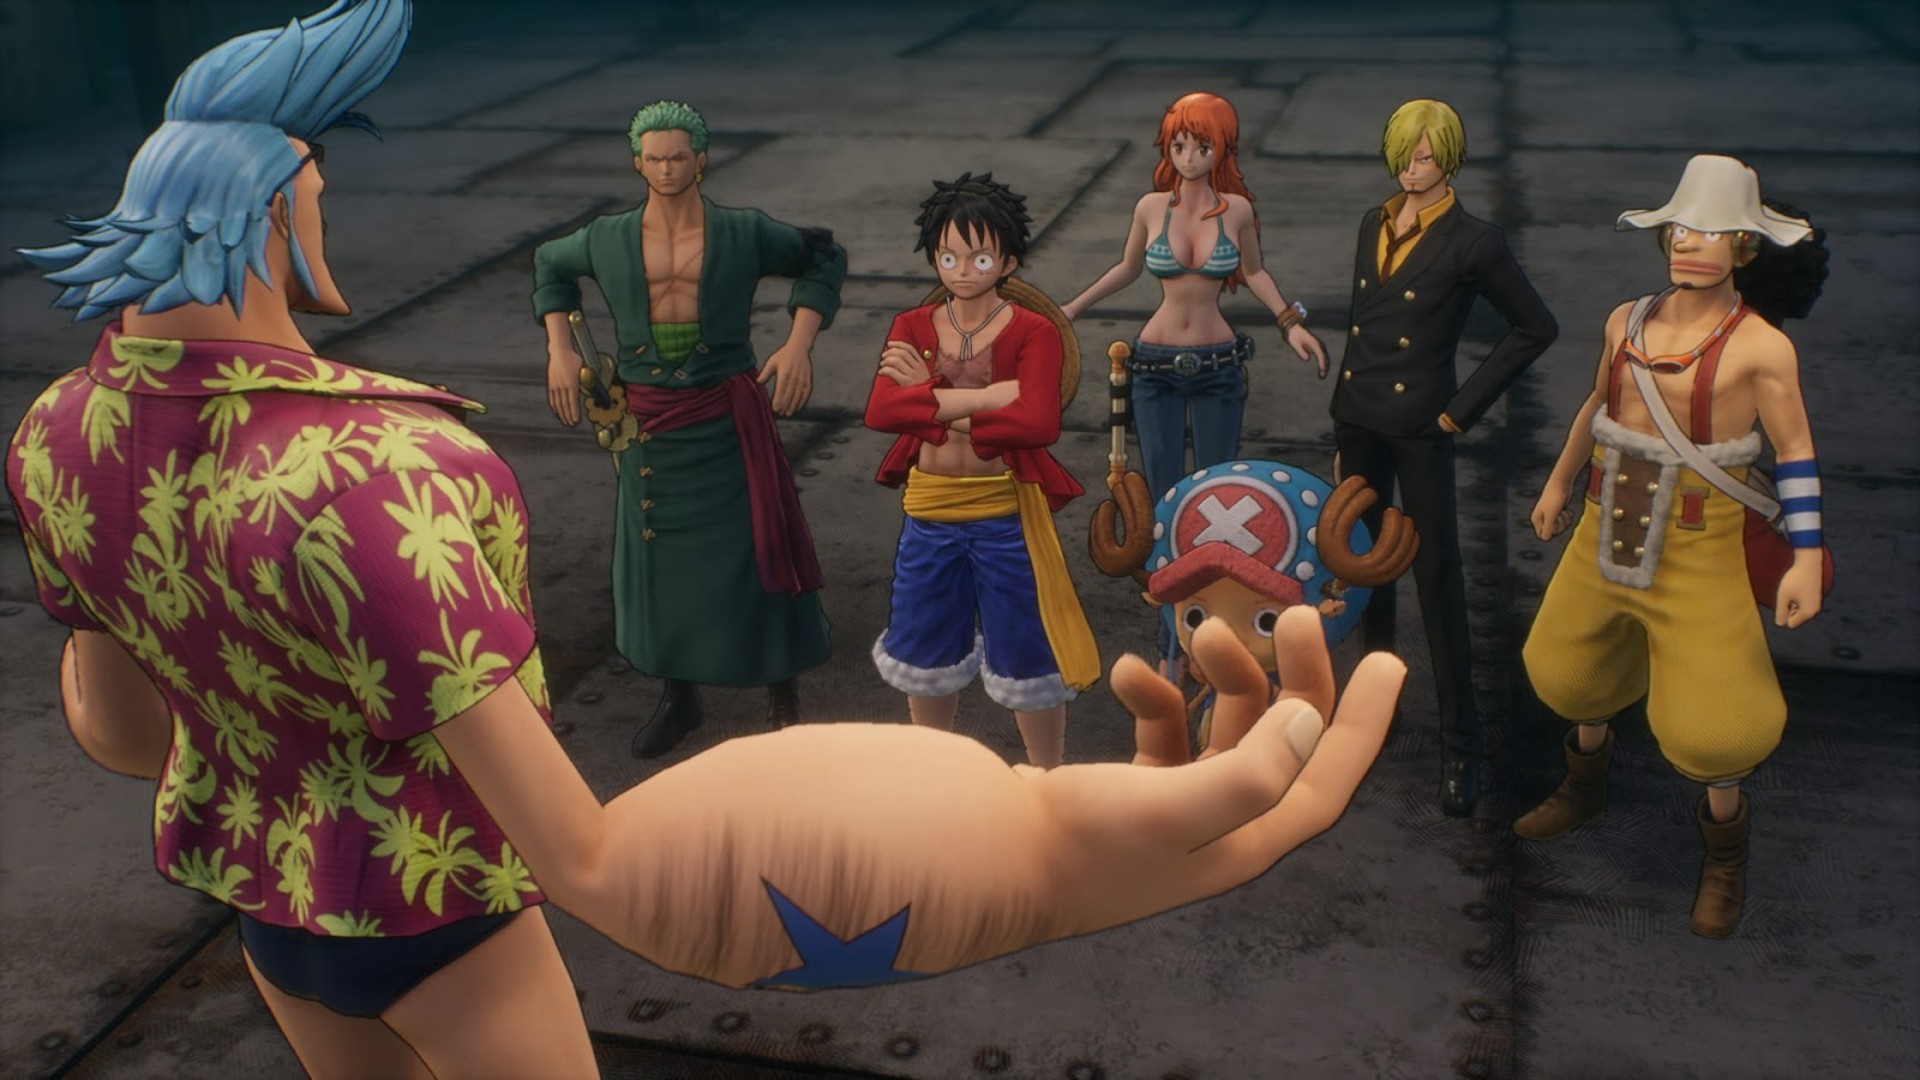 One Piece Odyssey RPG release date set for January - Polygon